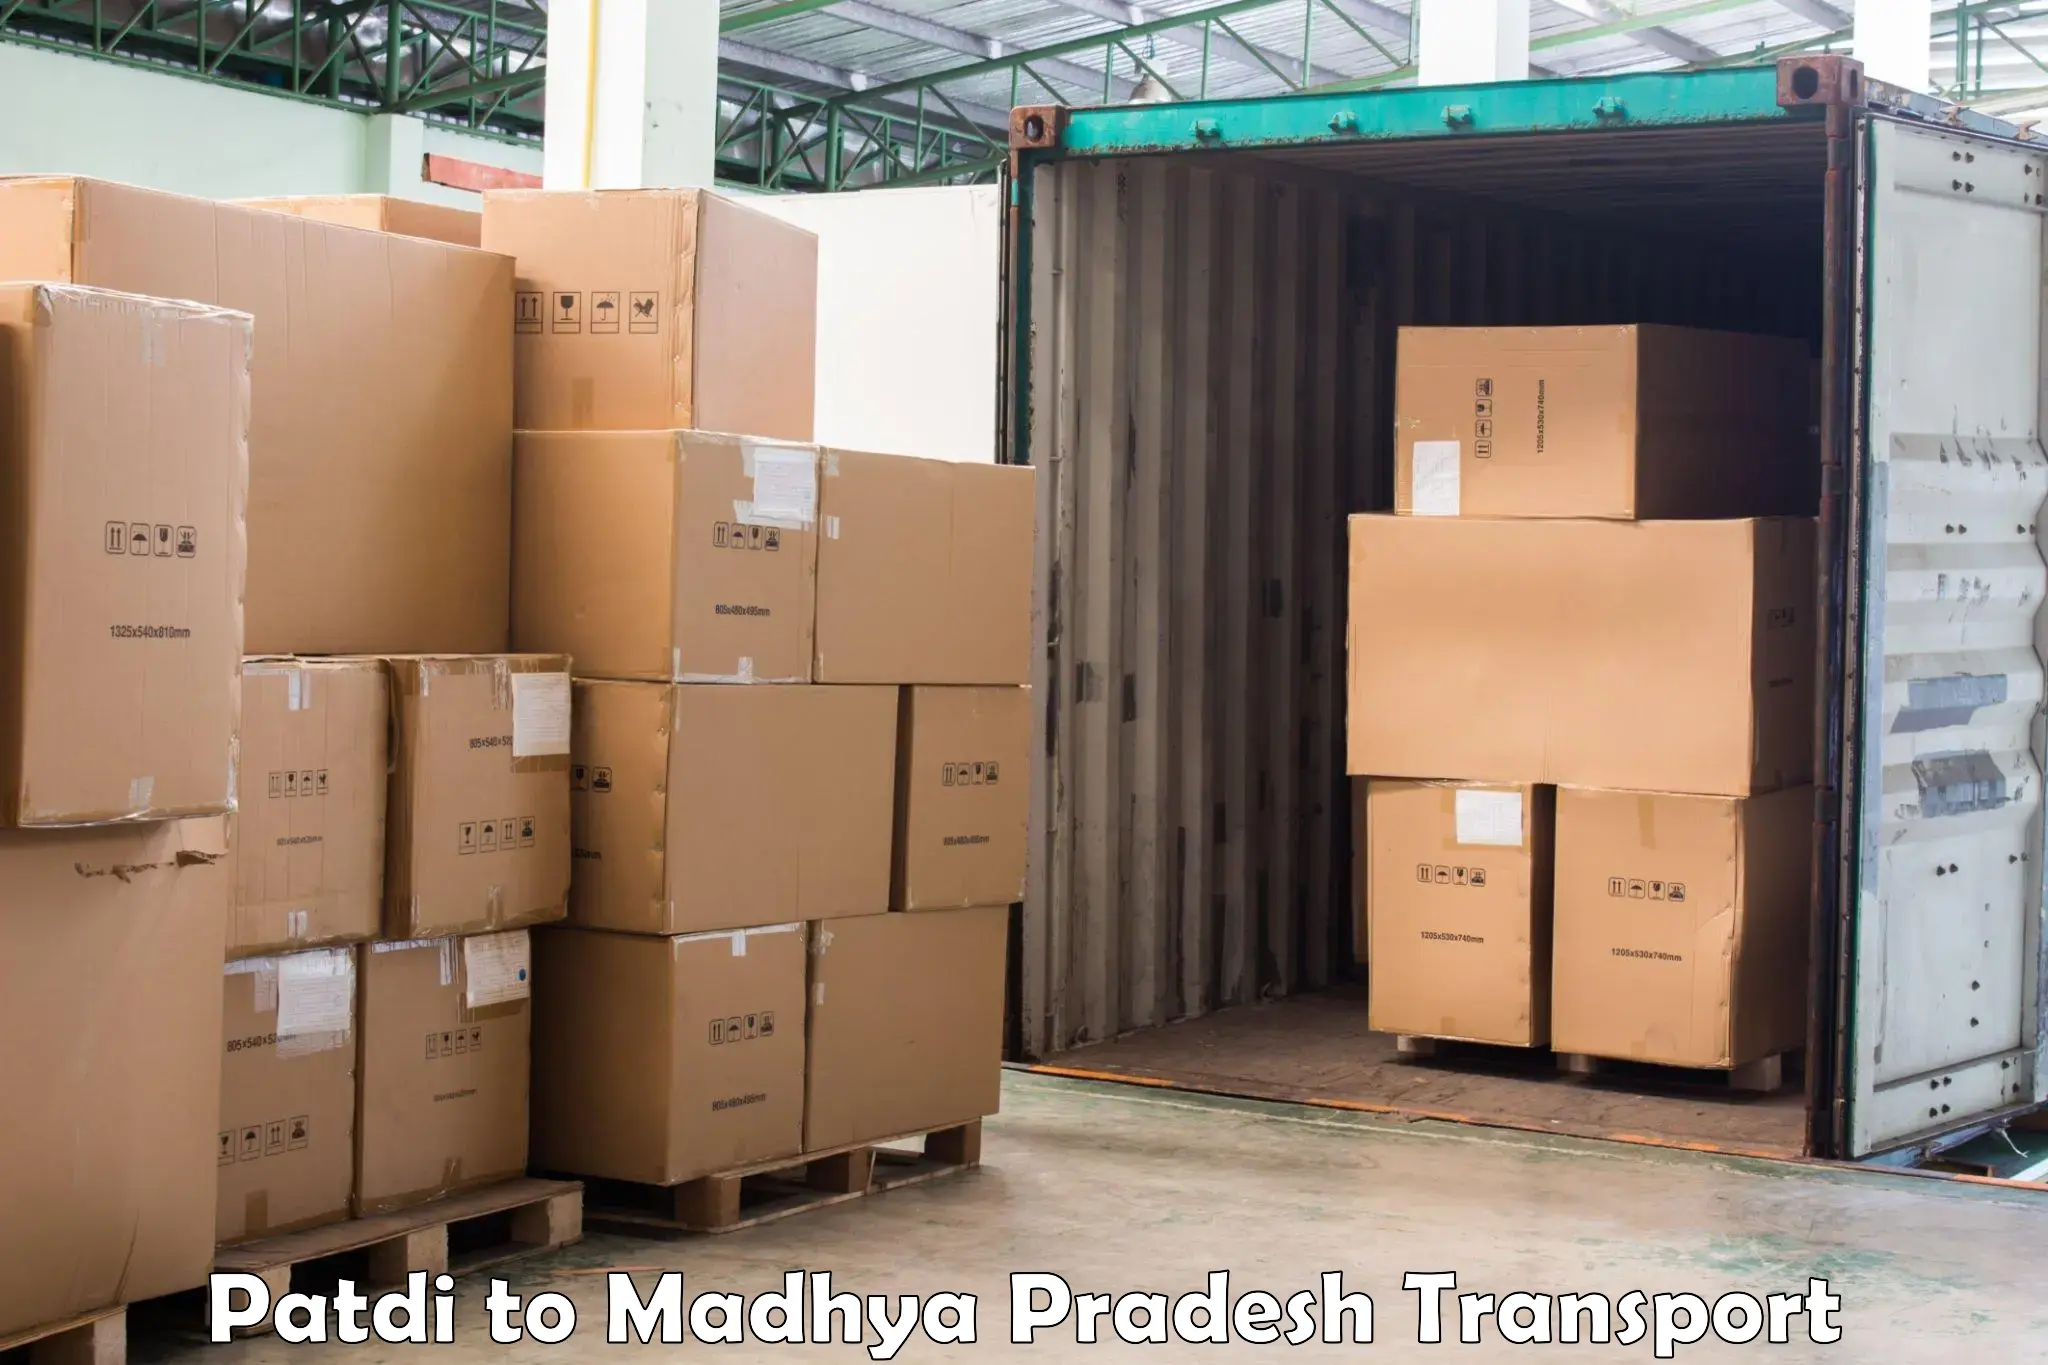 Truck transport companies in India Patdi to Balaghat